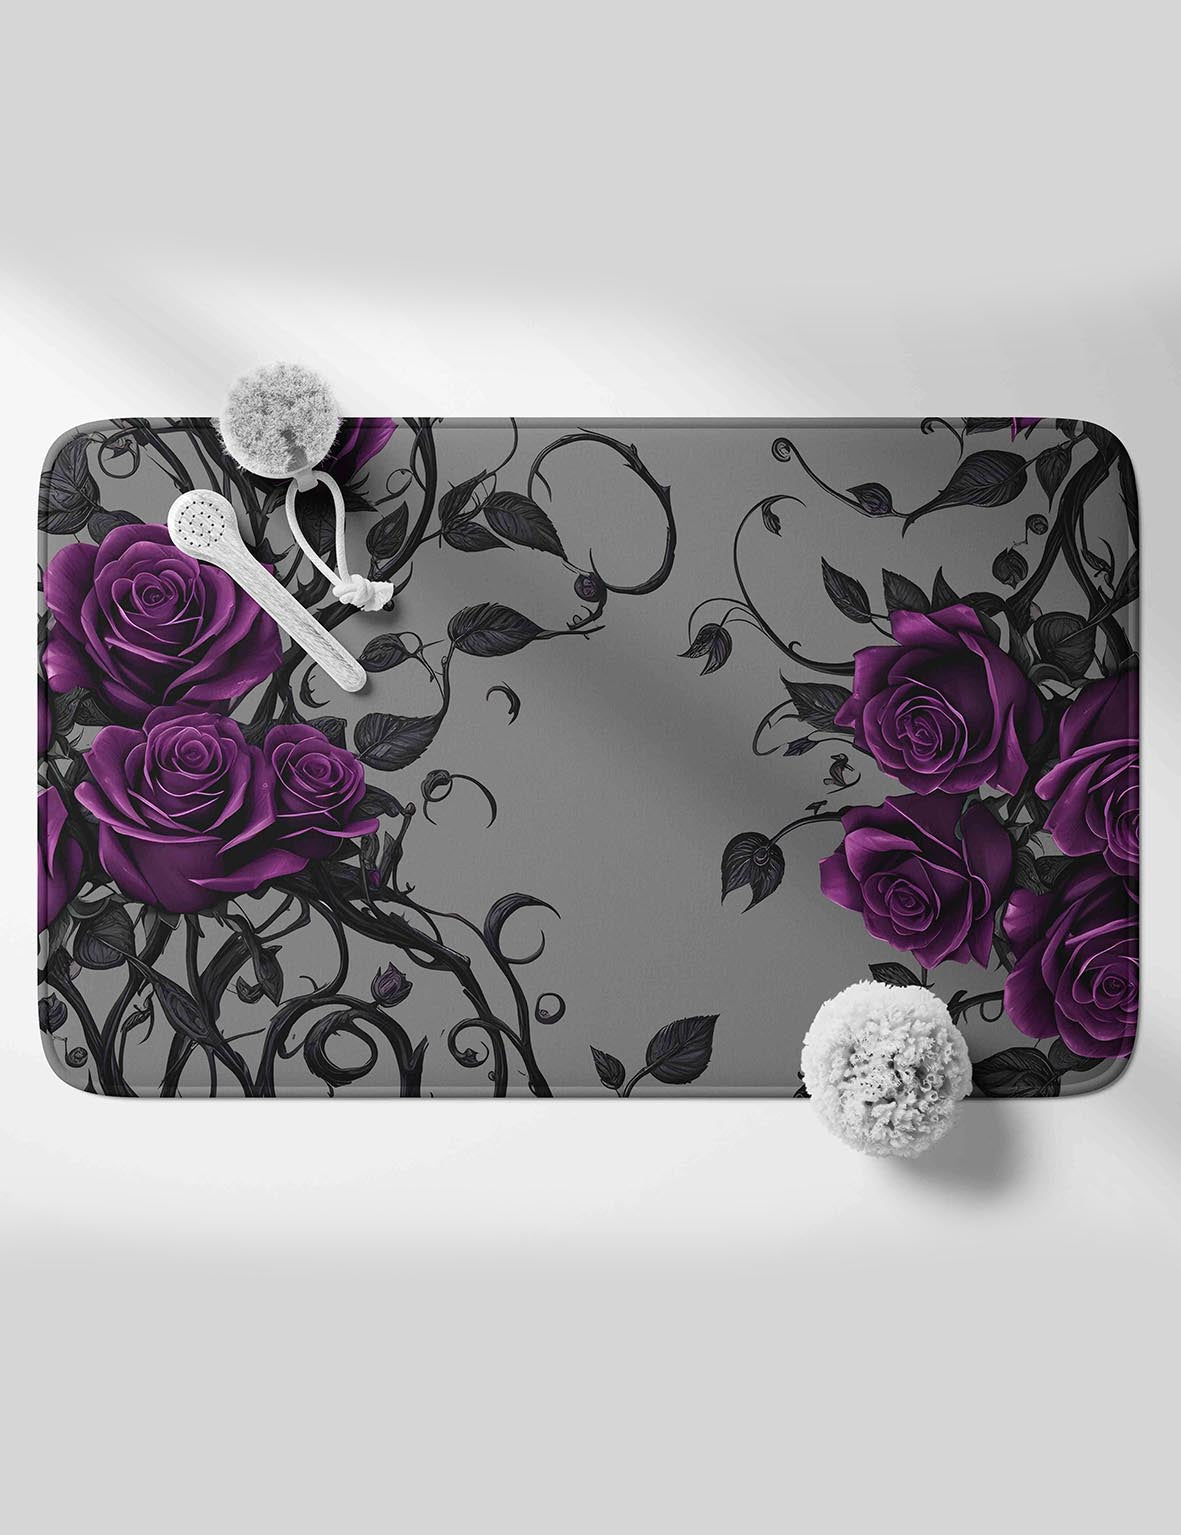 BED OF ROSES - Shower Curtain / Bath Mat Set